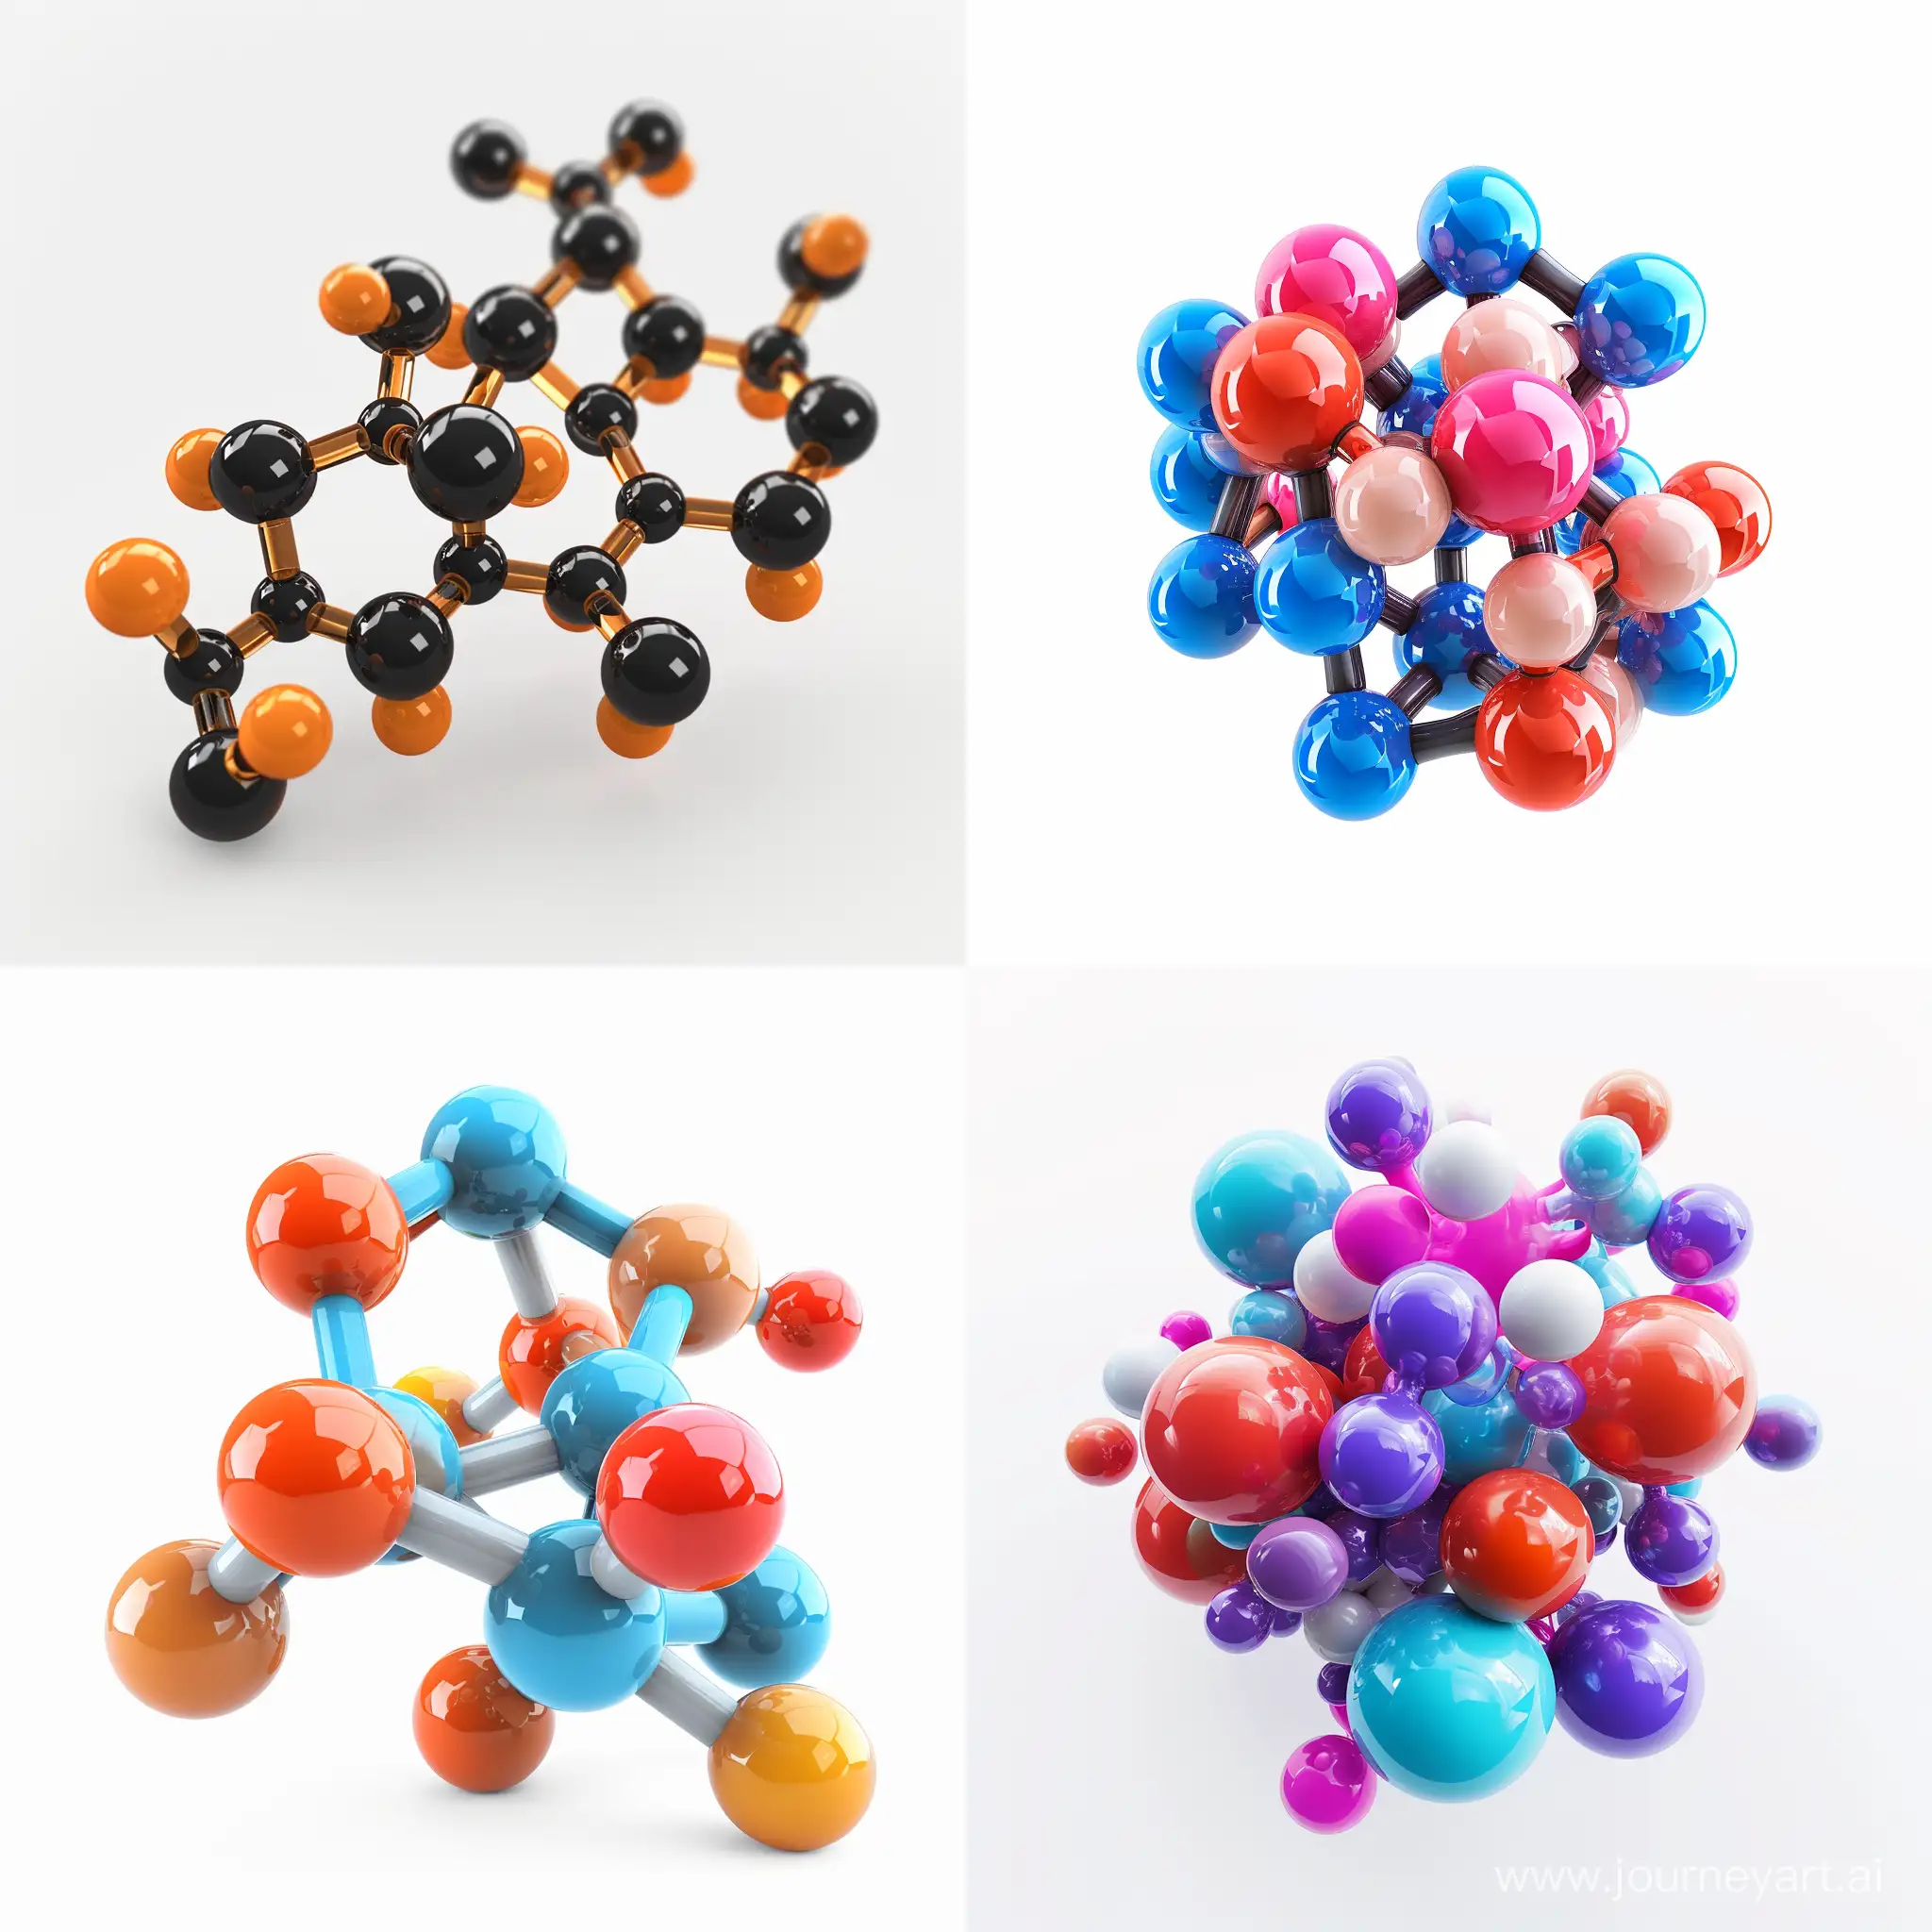 Synthetic-Rubber-3D-Icon-Abstract-Visualization-of-Solution-Polymerized-Butadiene